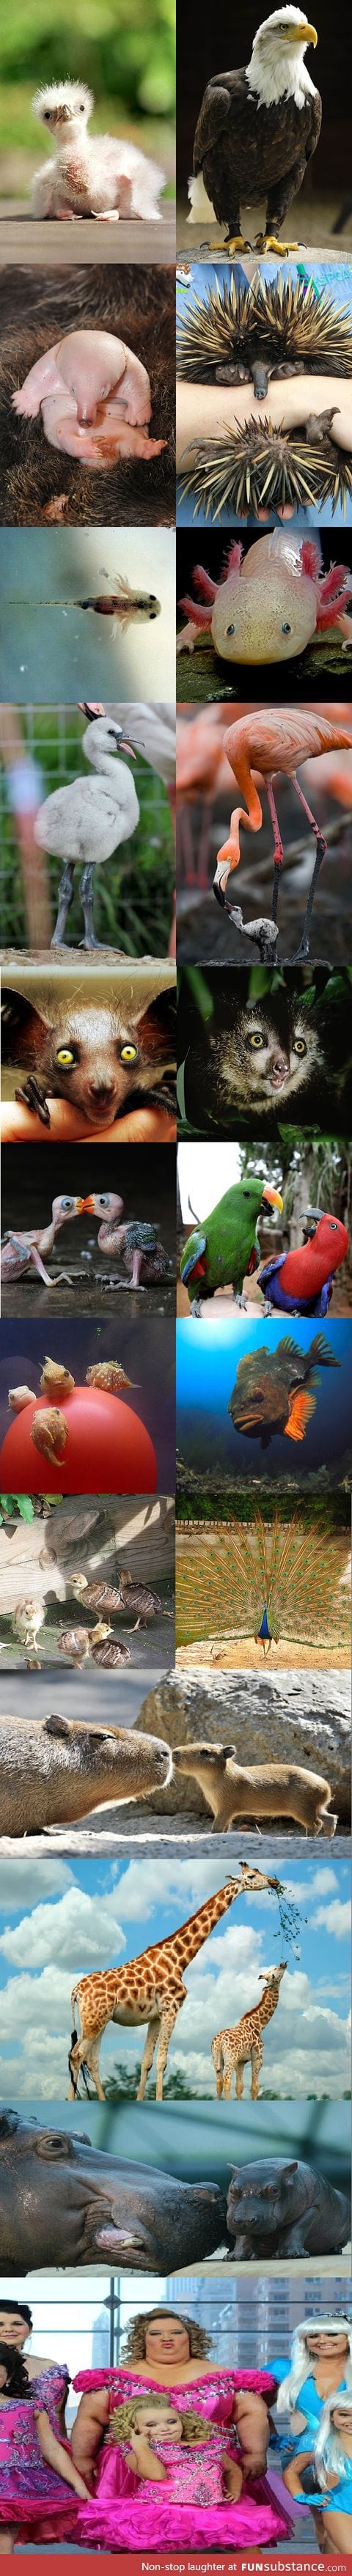 Animals from baby to adult